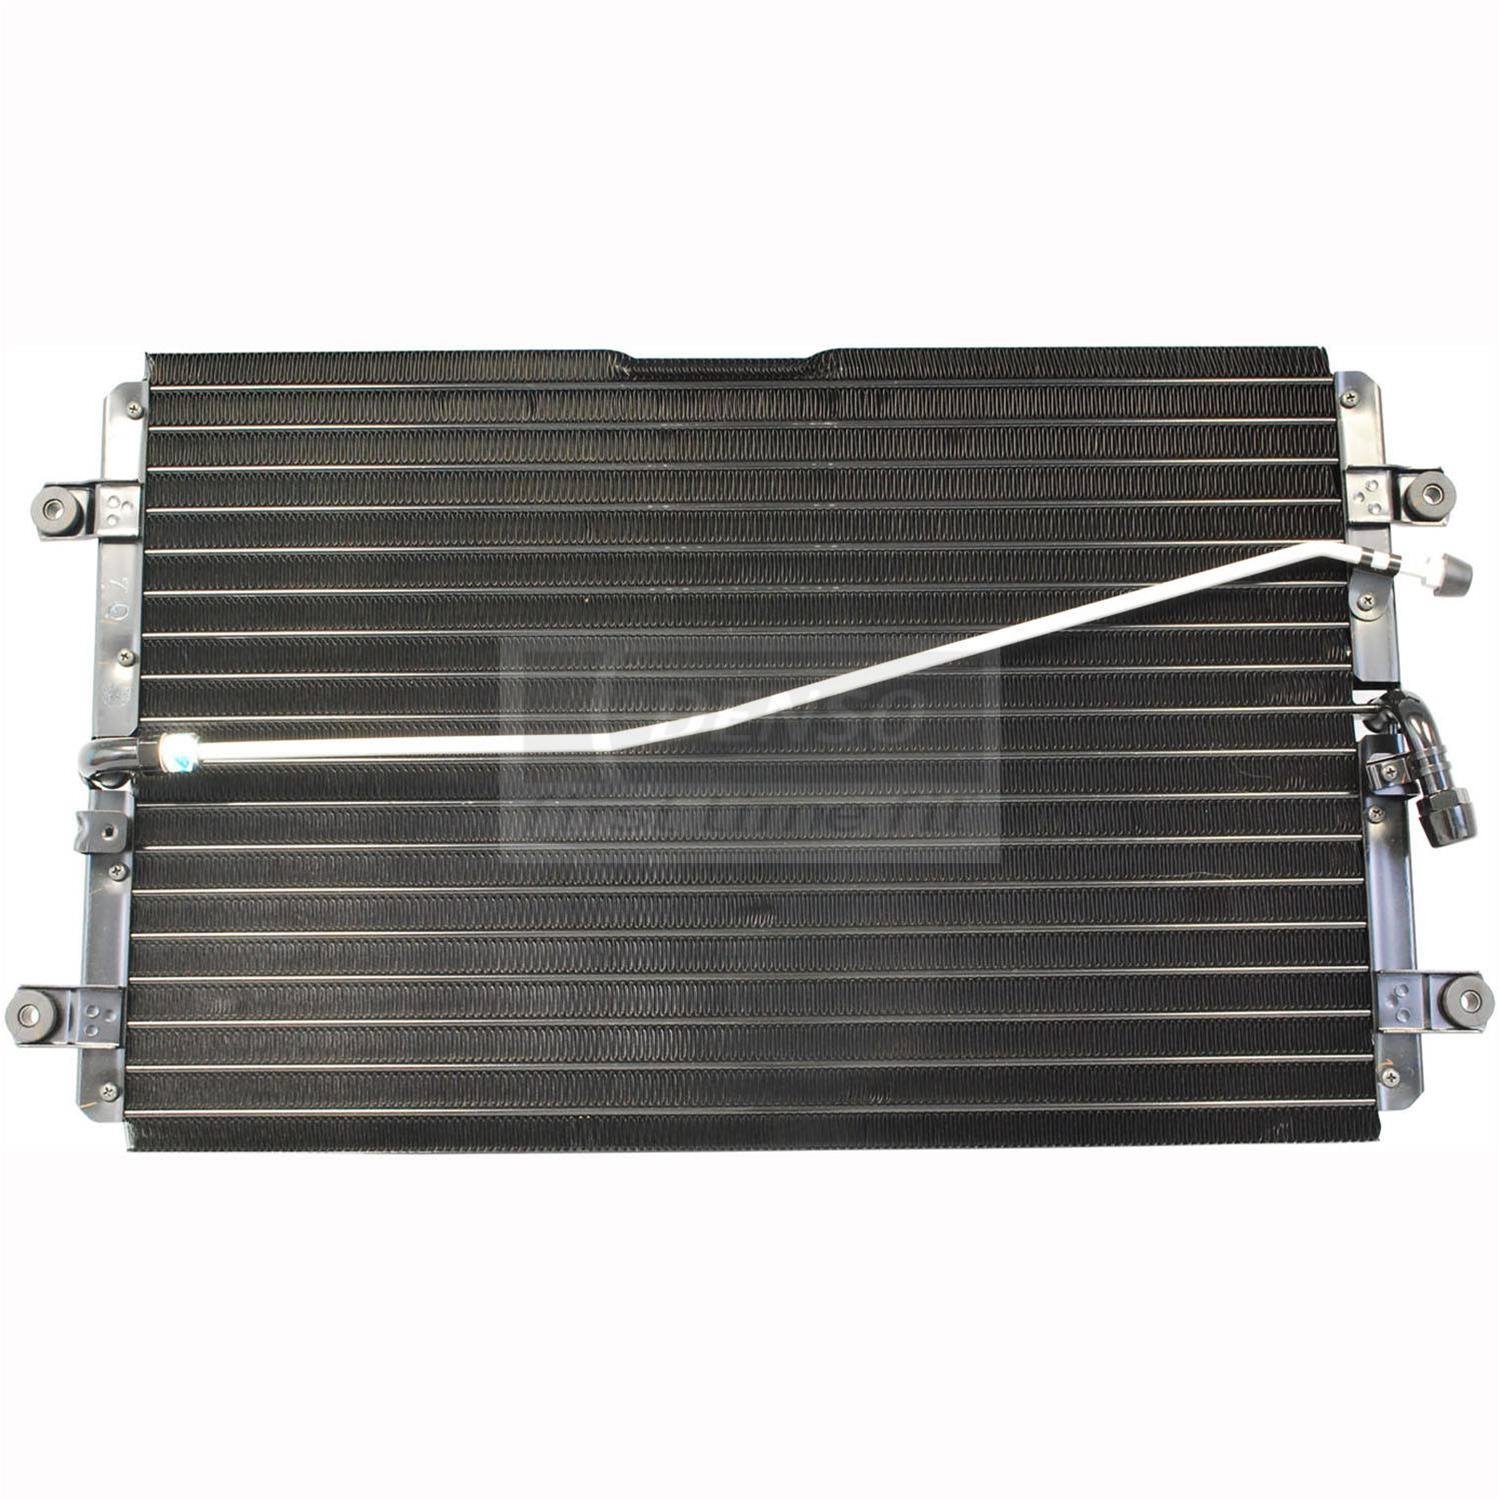 Air Conditioning Condenser for Select 1988-1990 Toyota Land Cruiser